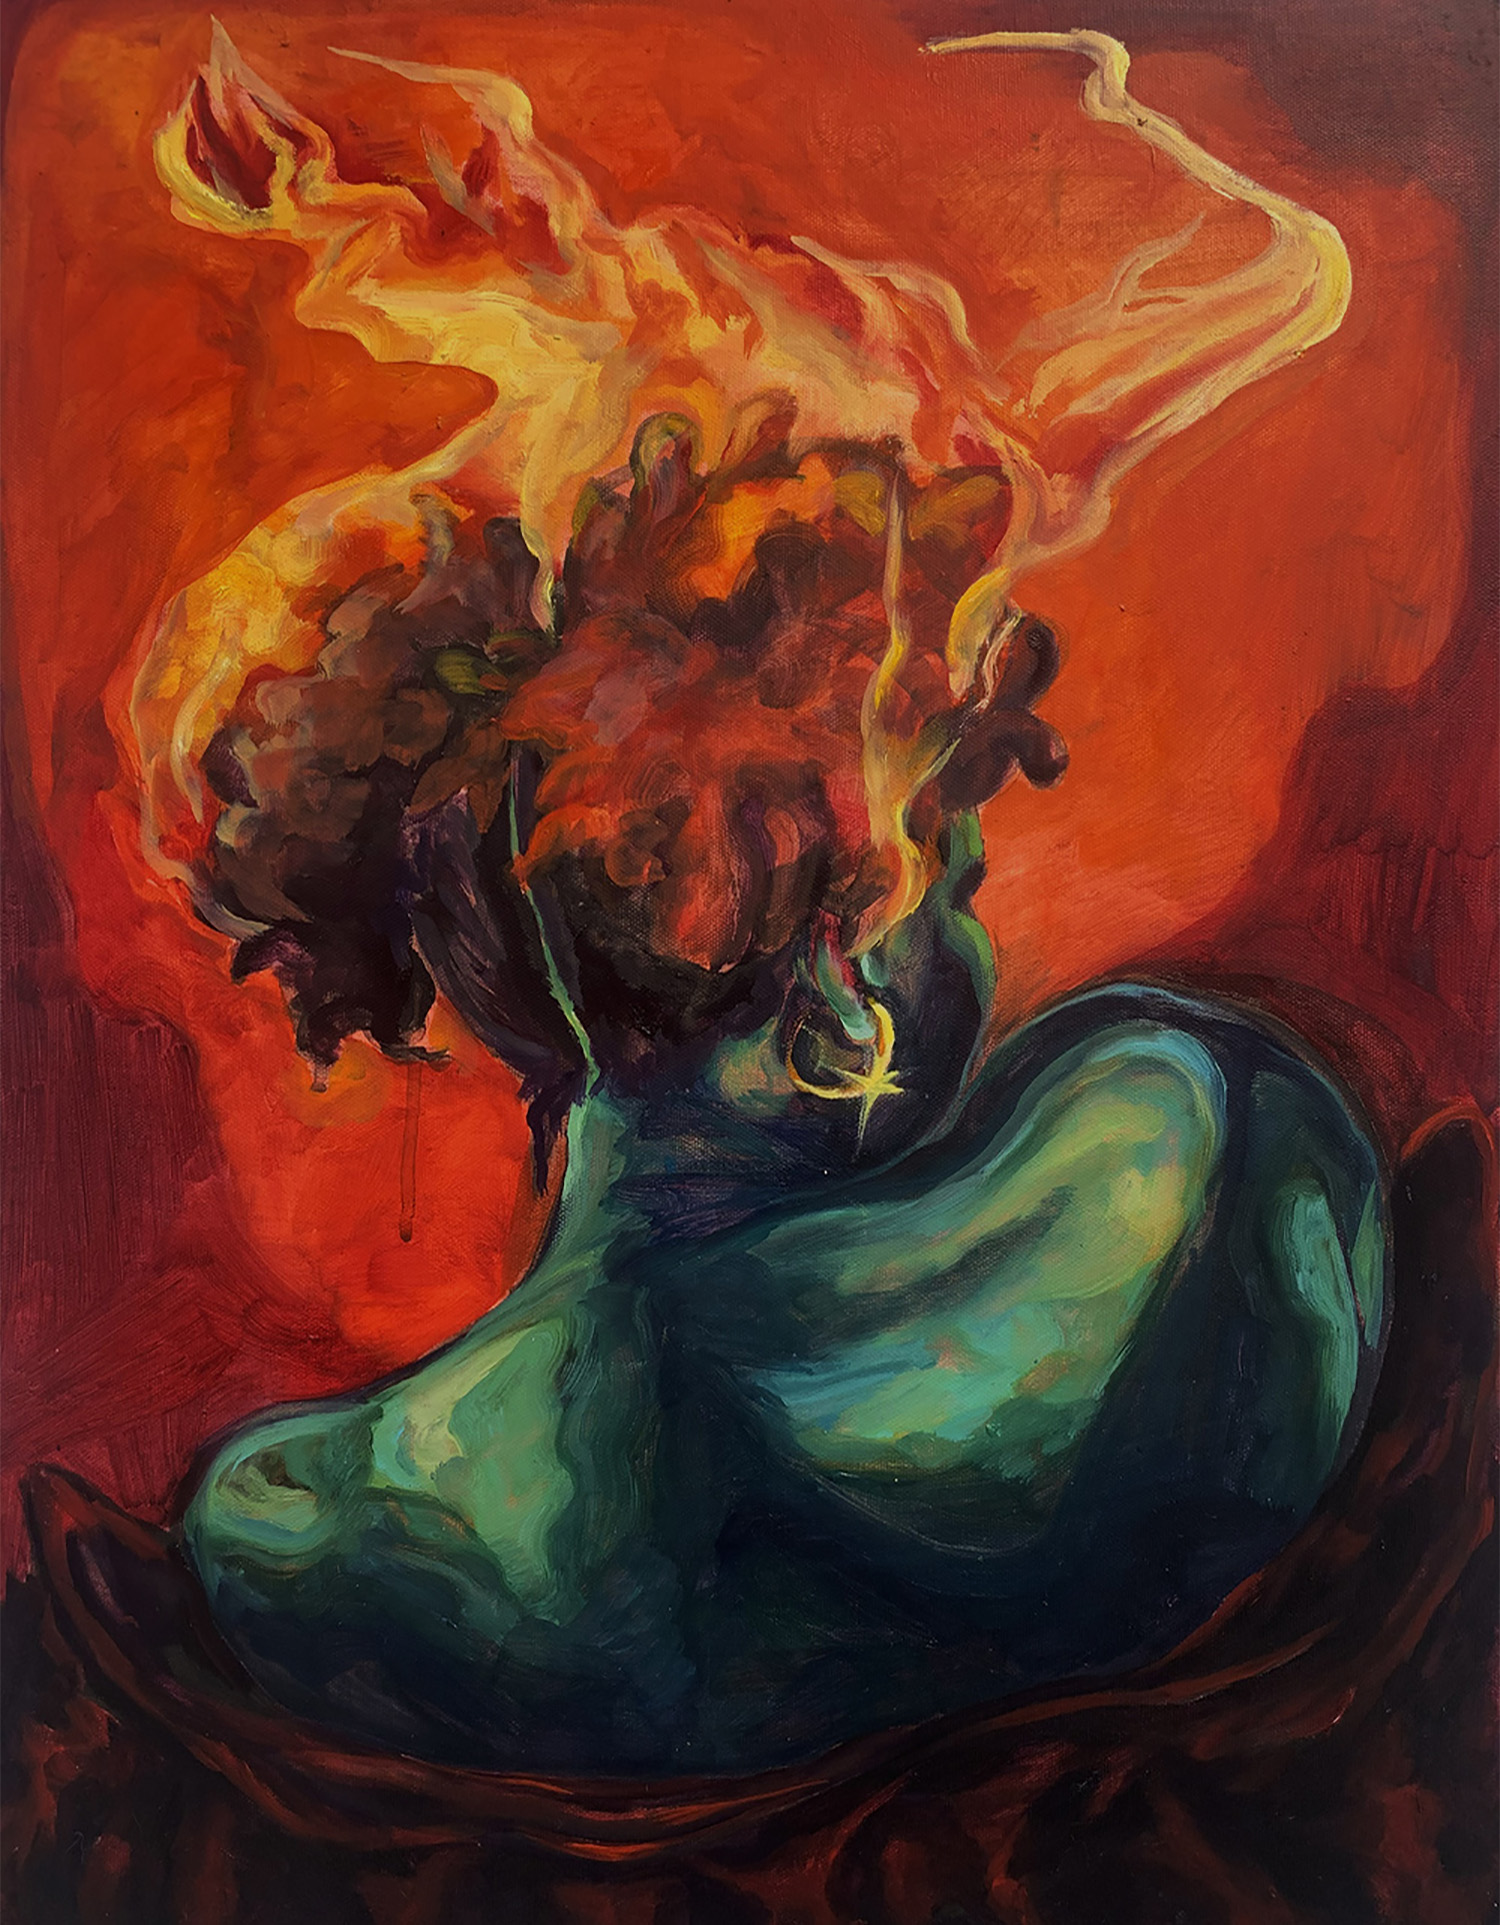 Colorful painting depicting woman with hair on fire